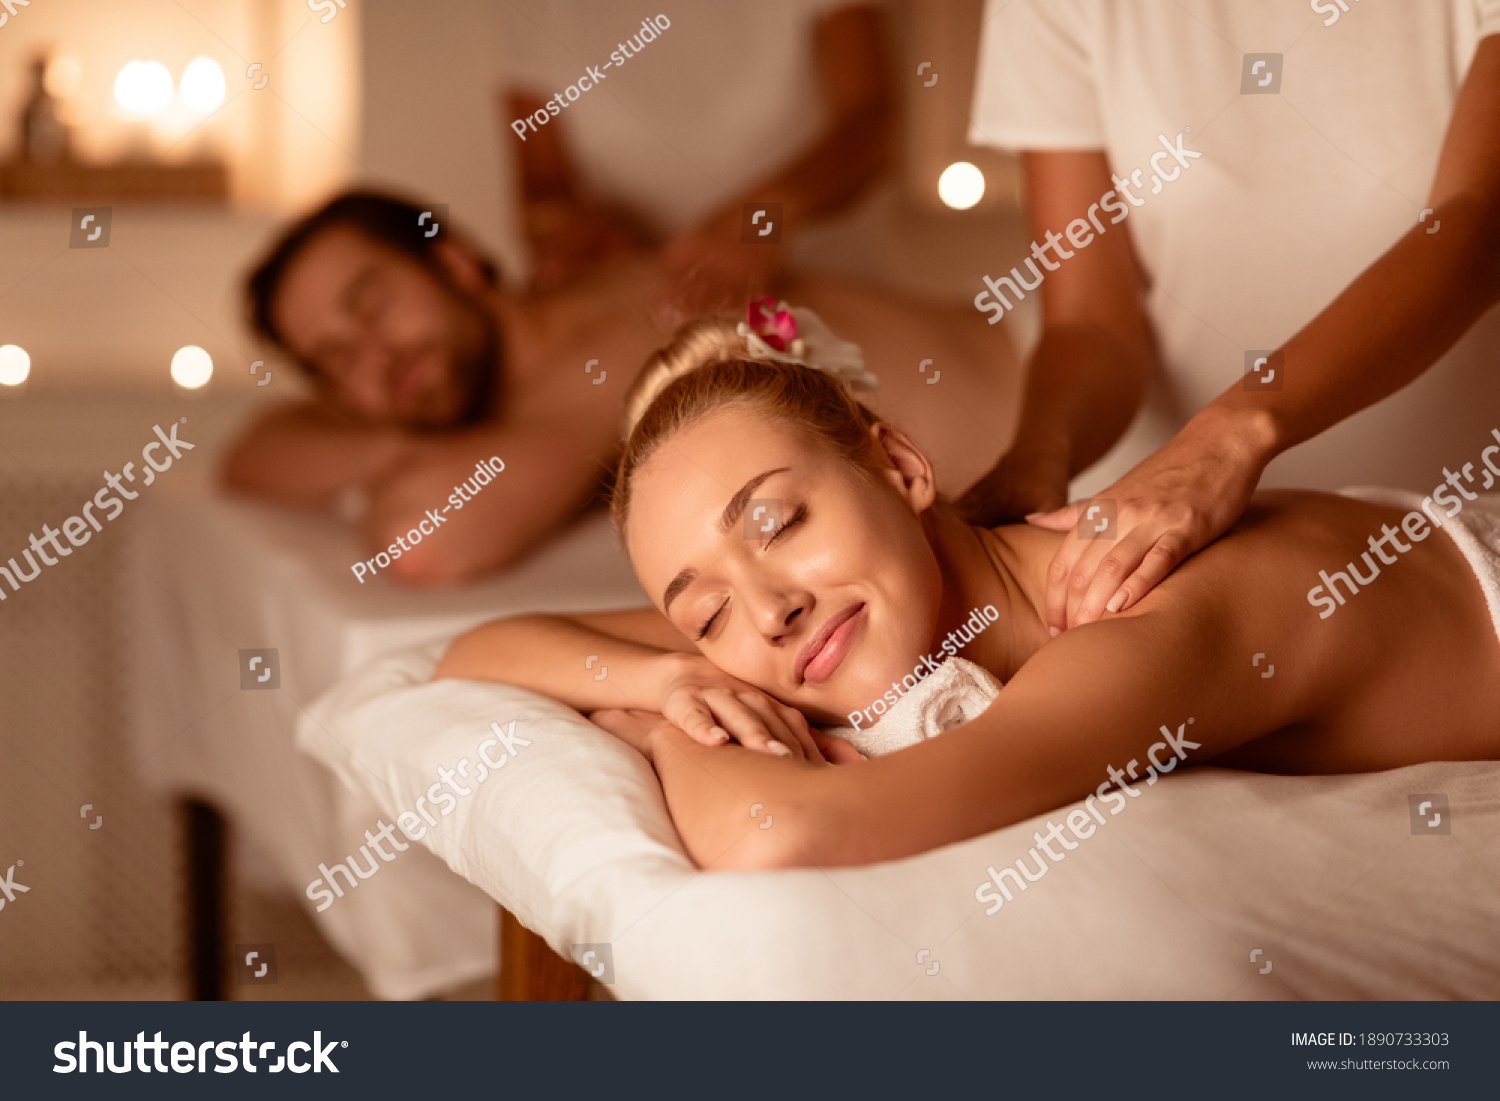 Couple Relaxing Receiving Back Massage Lying Closing Eyes At Romantic Luxury Spa With Burning Candles And Flowers. Wellness And Body Relaxation Therapy. Selective Focus, Low Light #1890733303